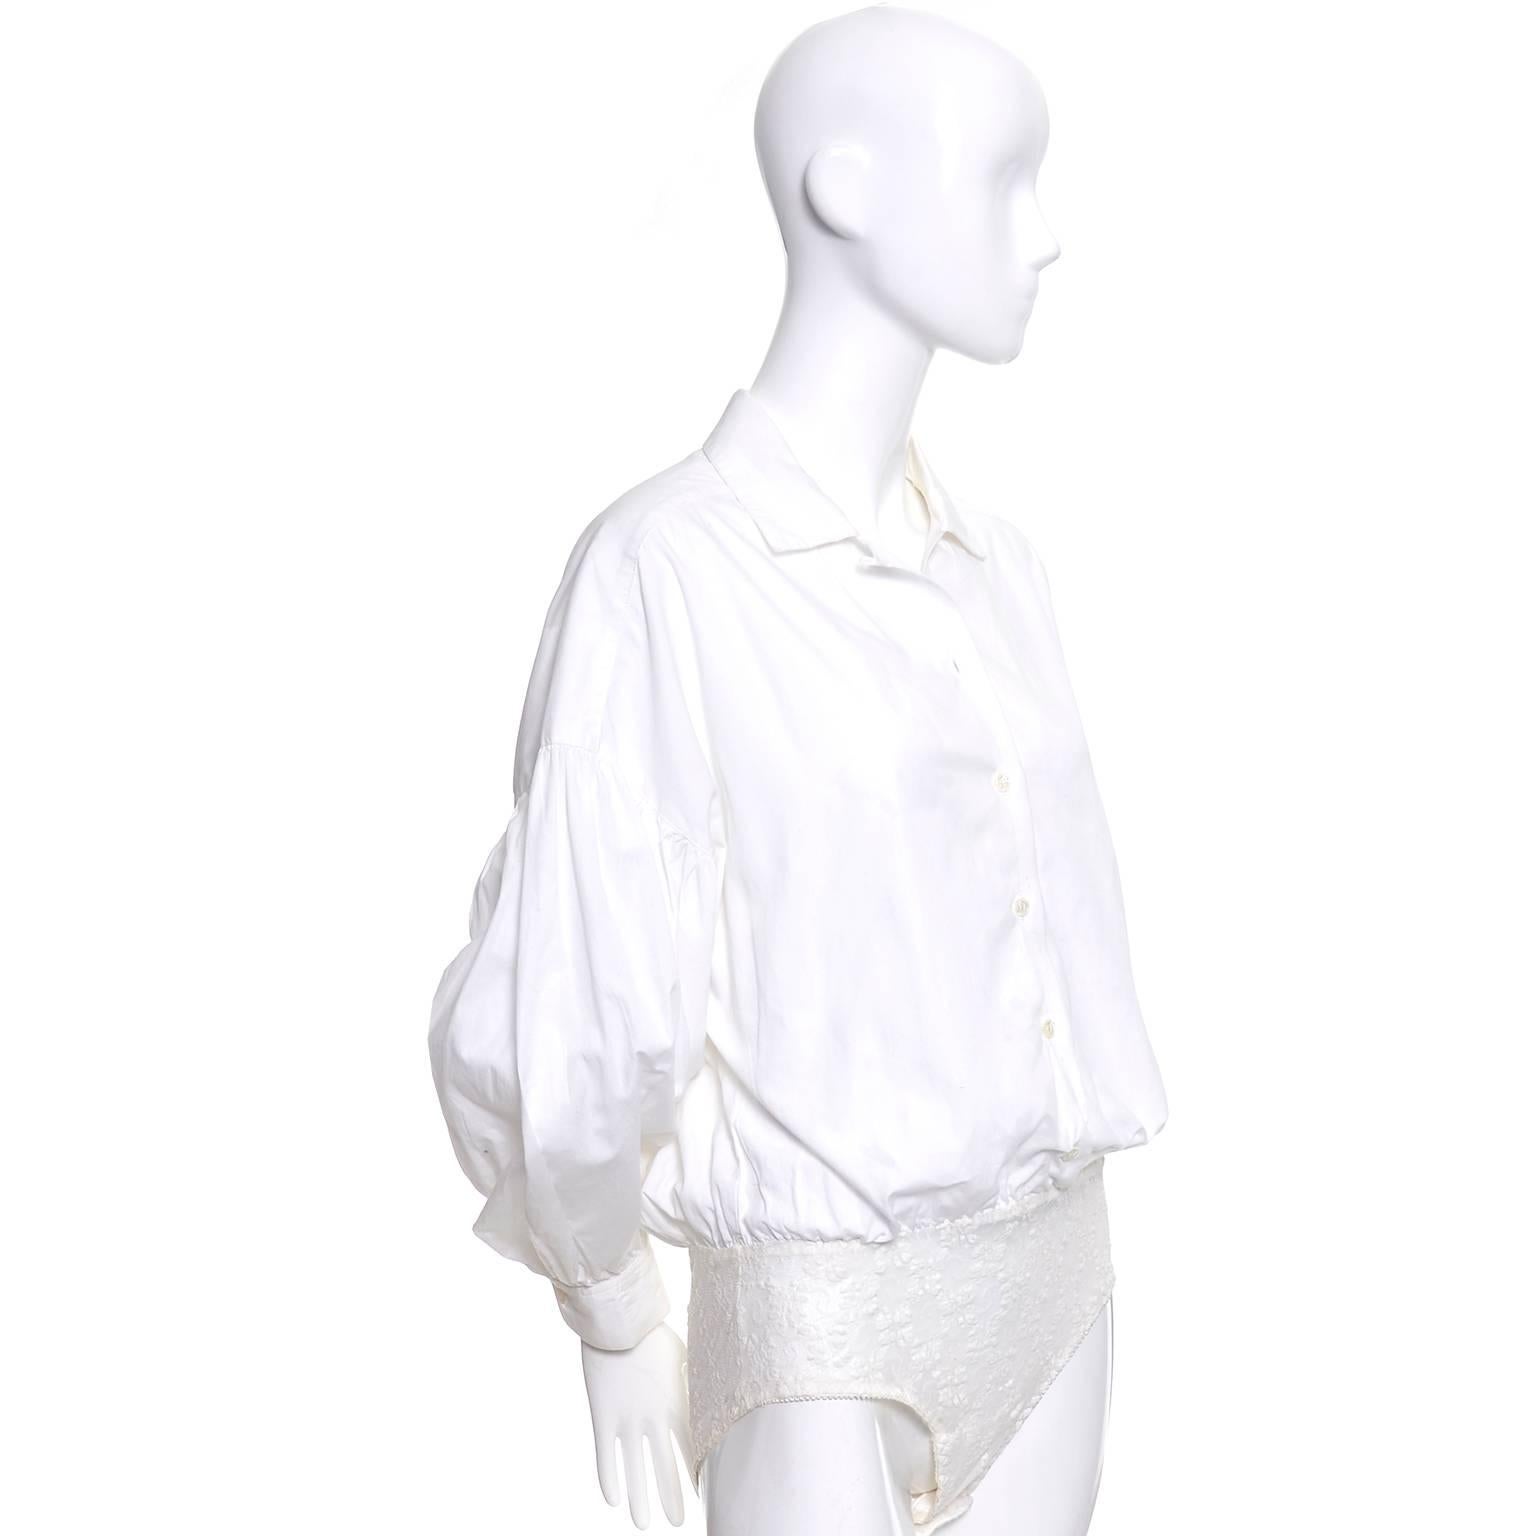 This is a fab vintage white cotton blouse from the 1980s from Christian Dior.  The blouse is a bodysuit with a stretch lace bottom that snaps and the puff sleeves are gathered at the drop shoulder line. These blouses were so popular in the 80's and